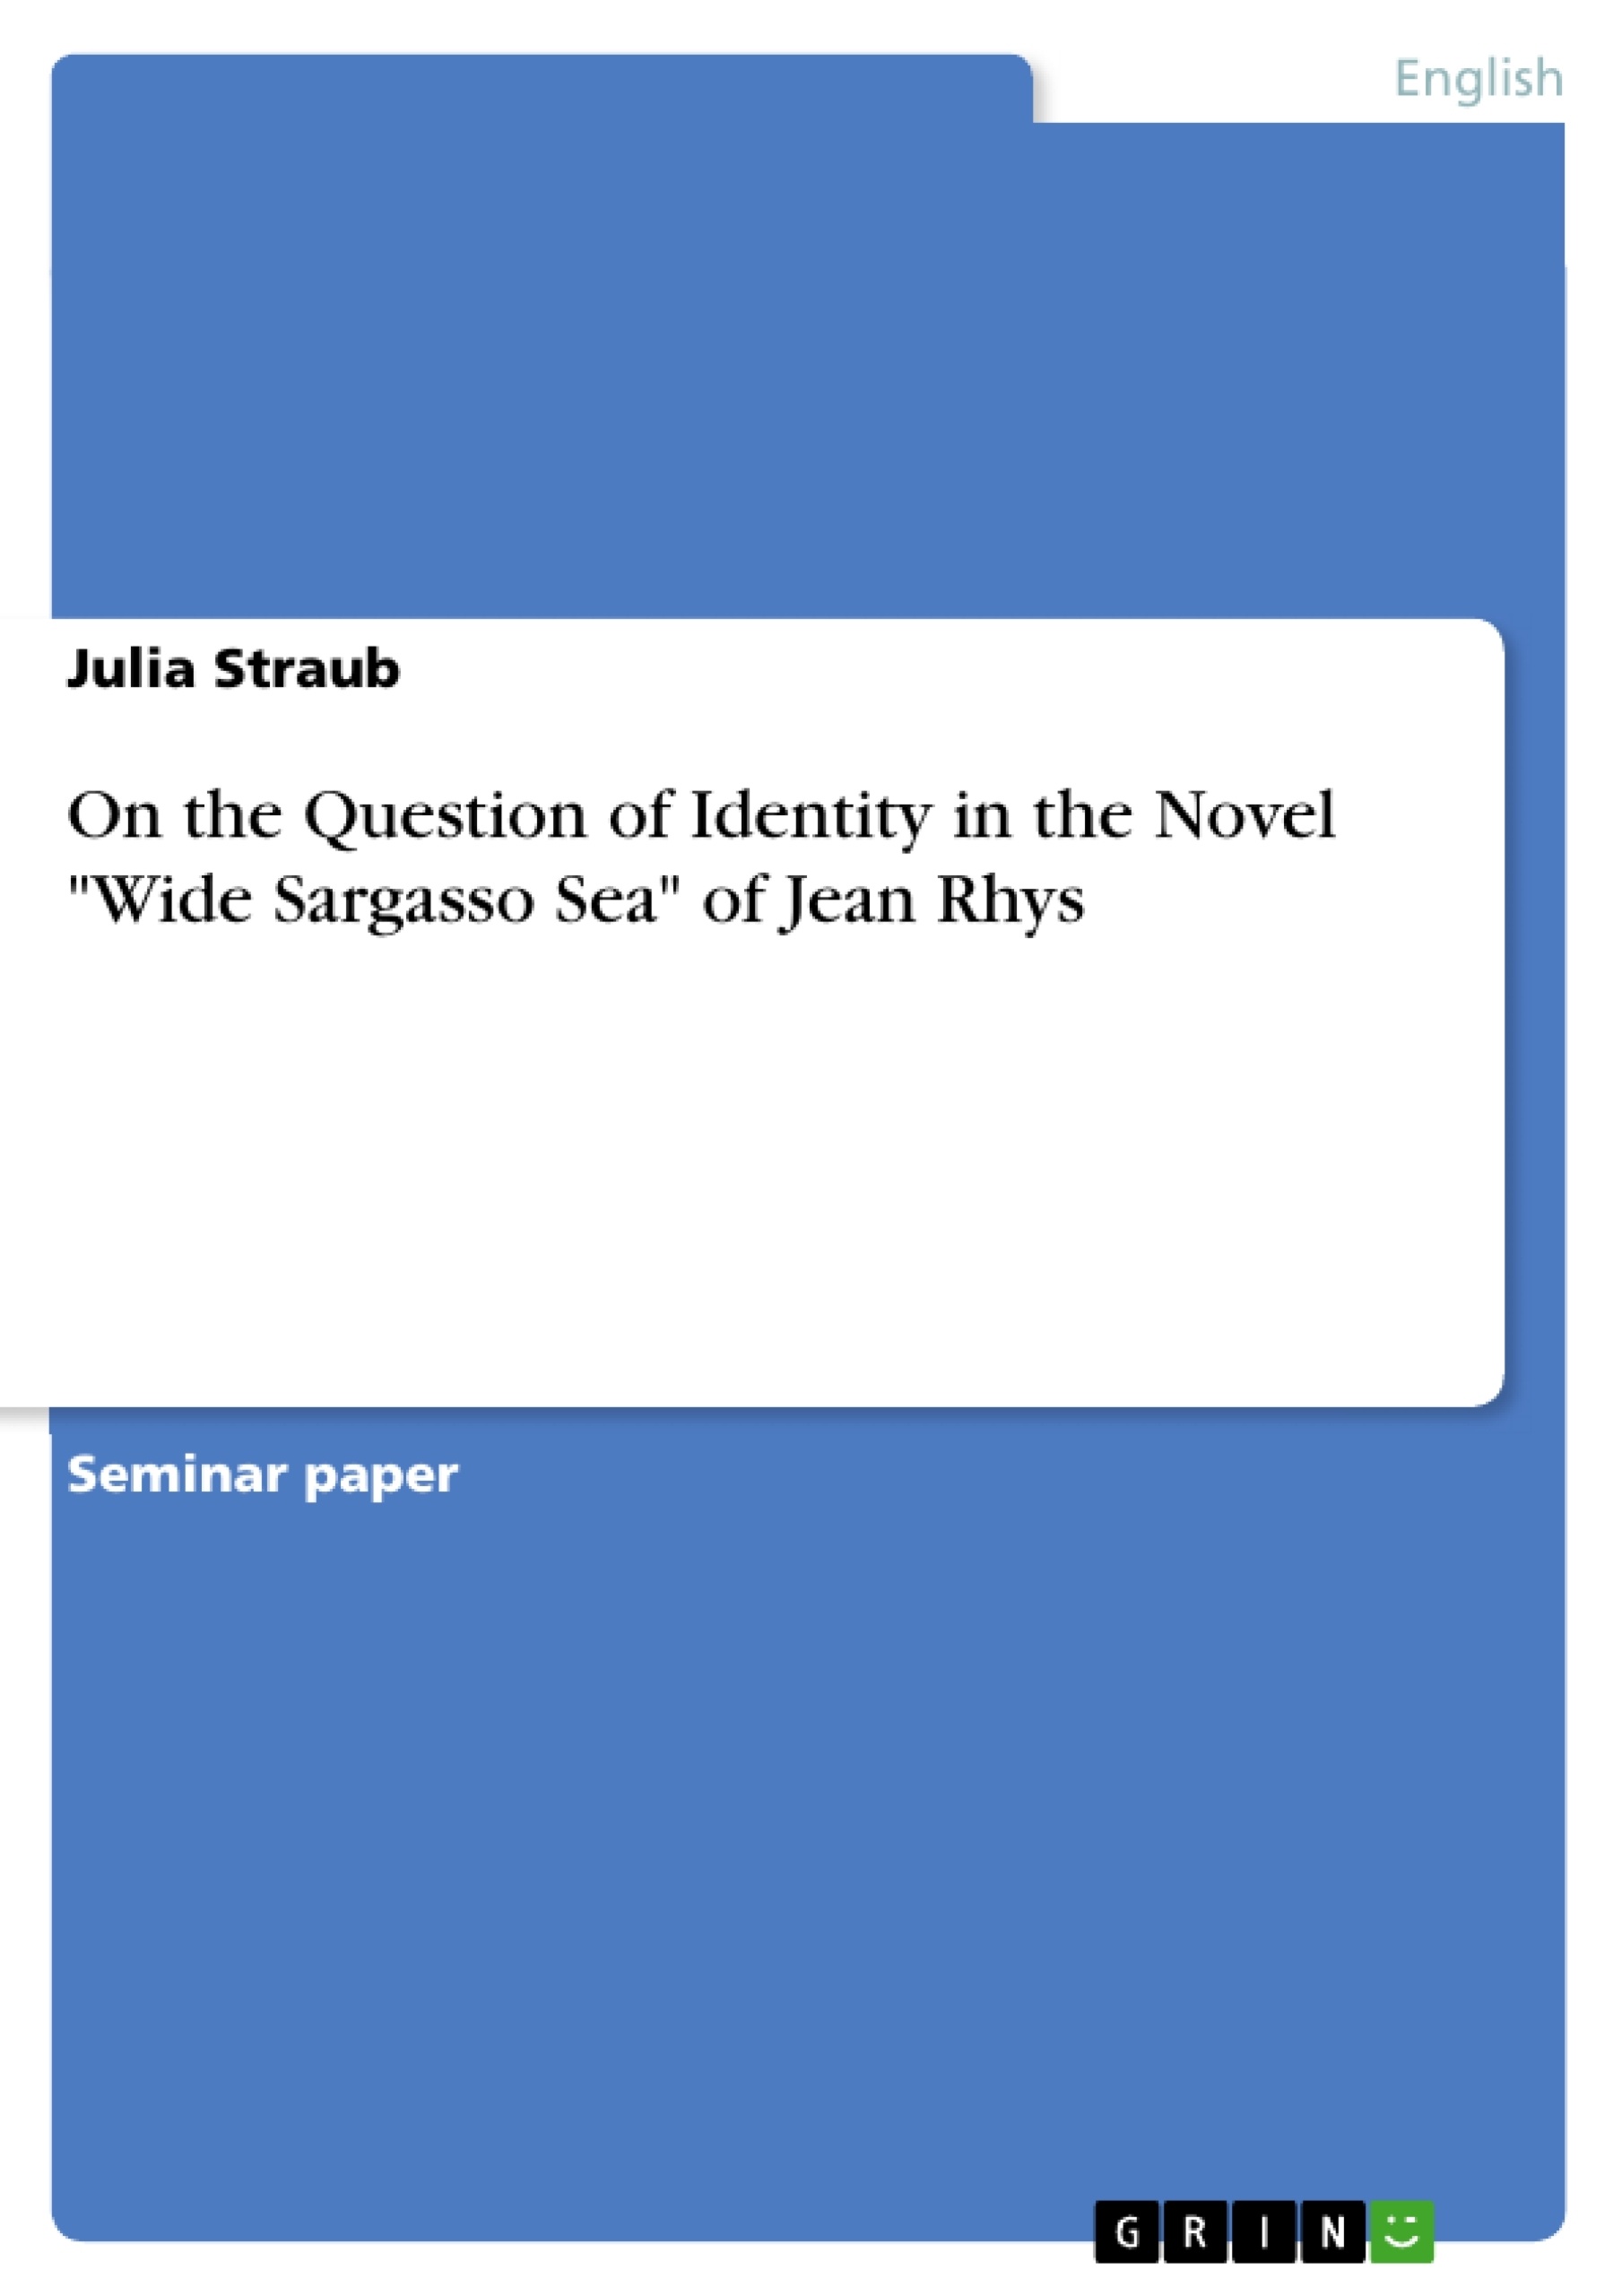 Title: On the Question of Identity in the Novel "Wide Sargasso Sea" of Jean Rhys